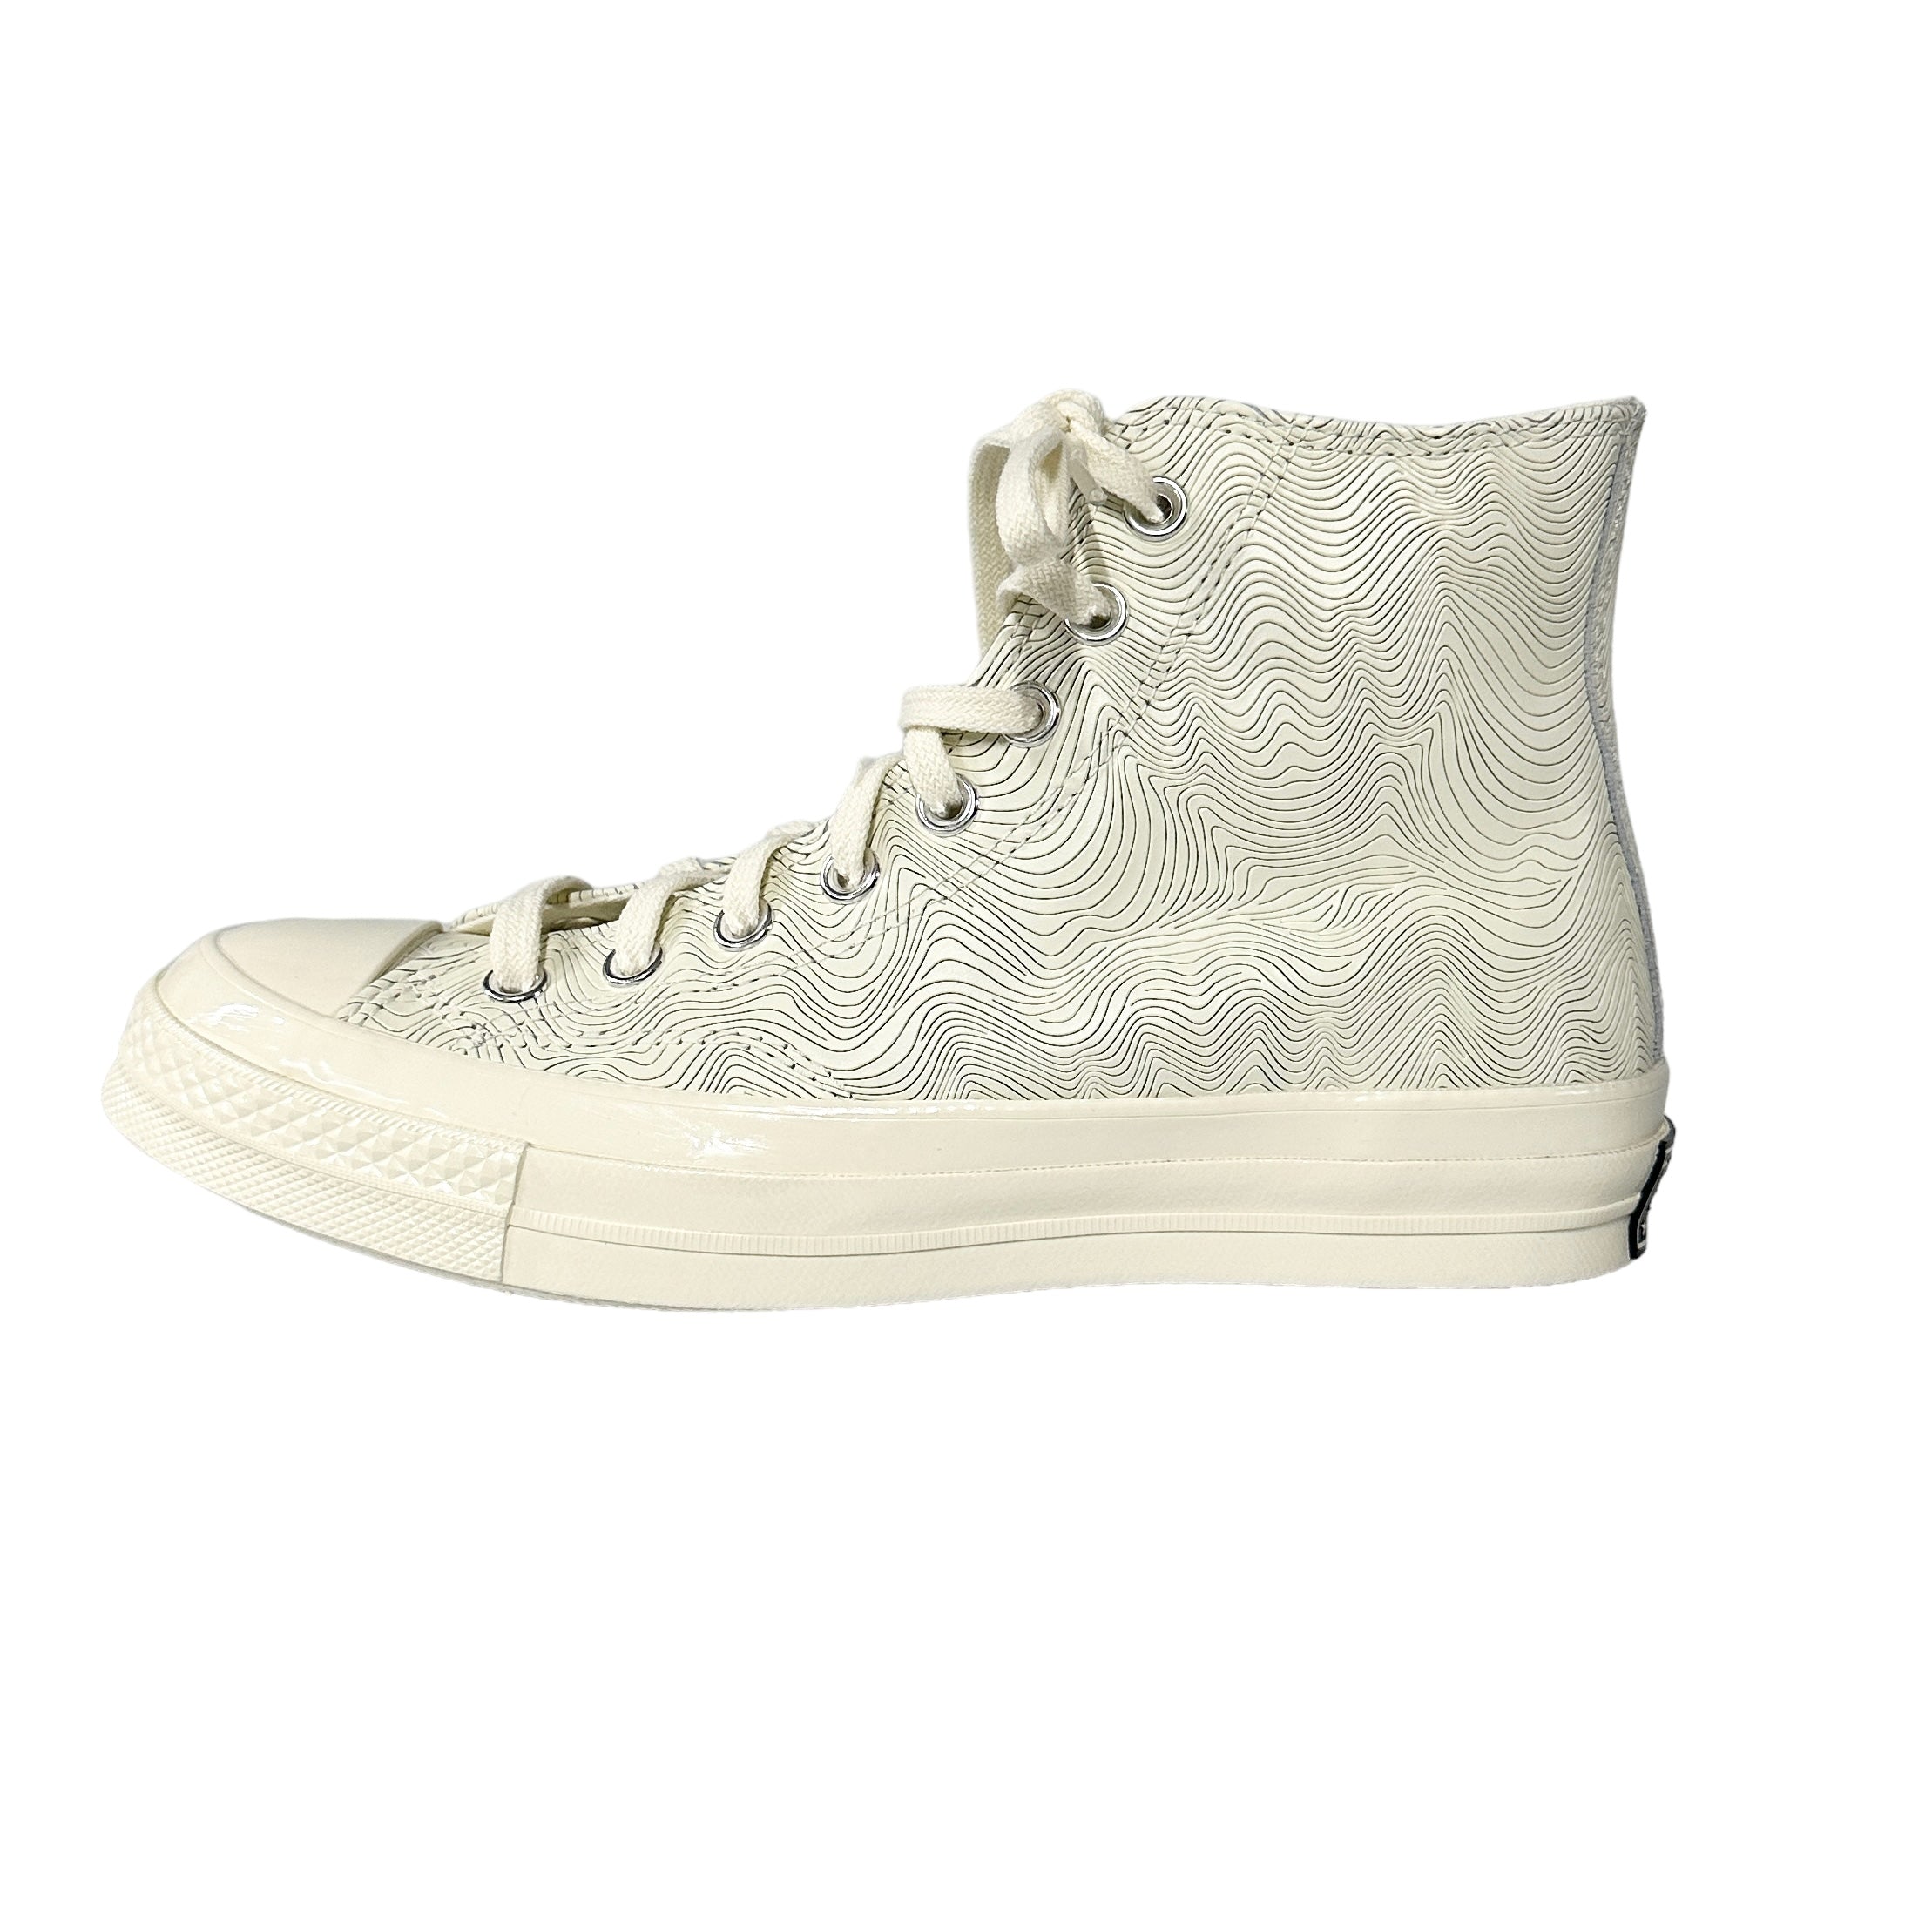 CONVERSE Chuck 70 High Top Unisex Trainers